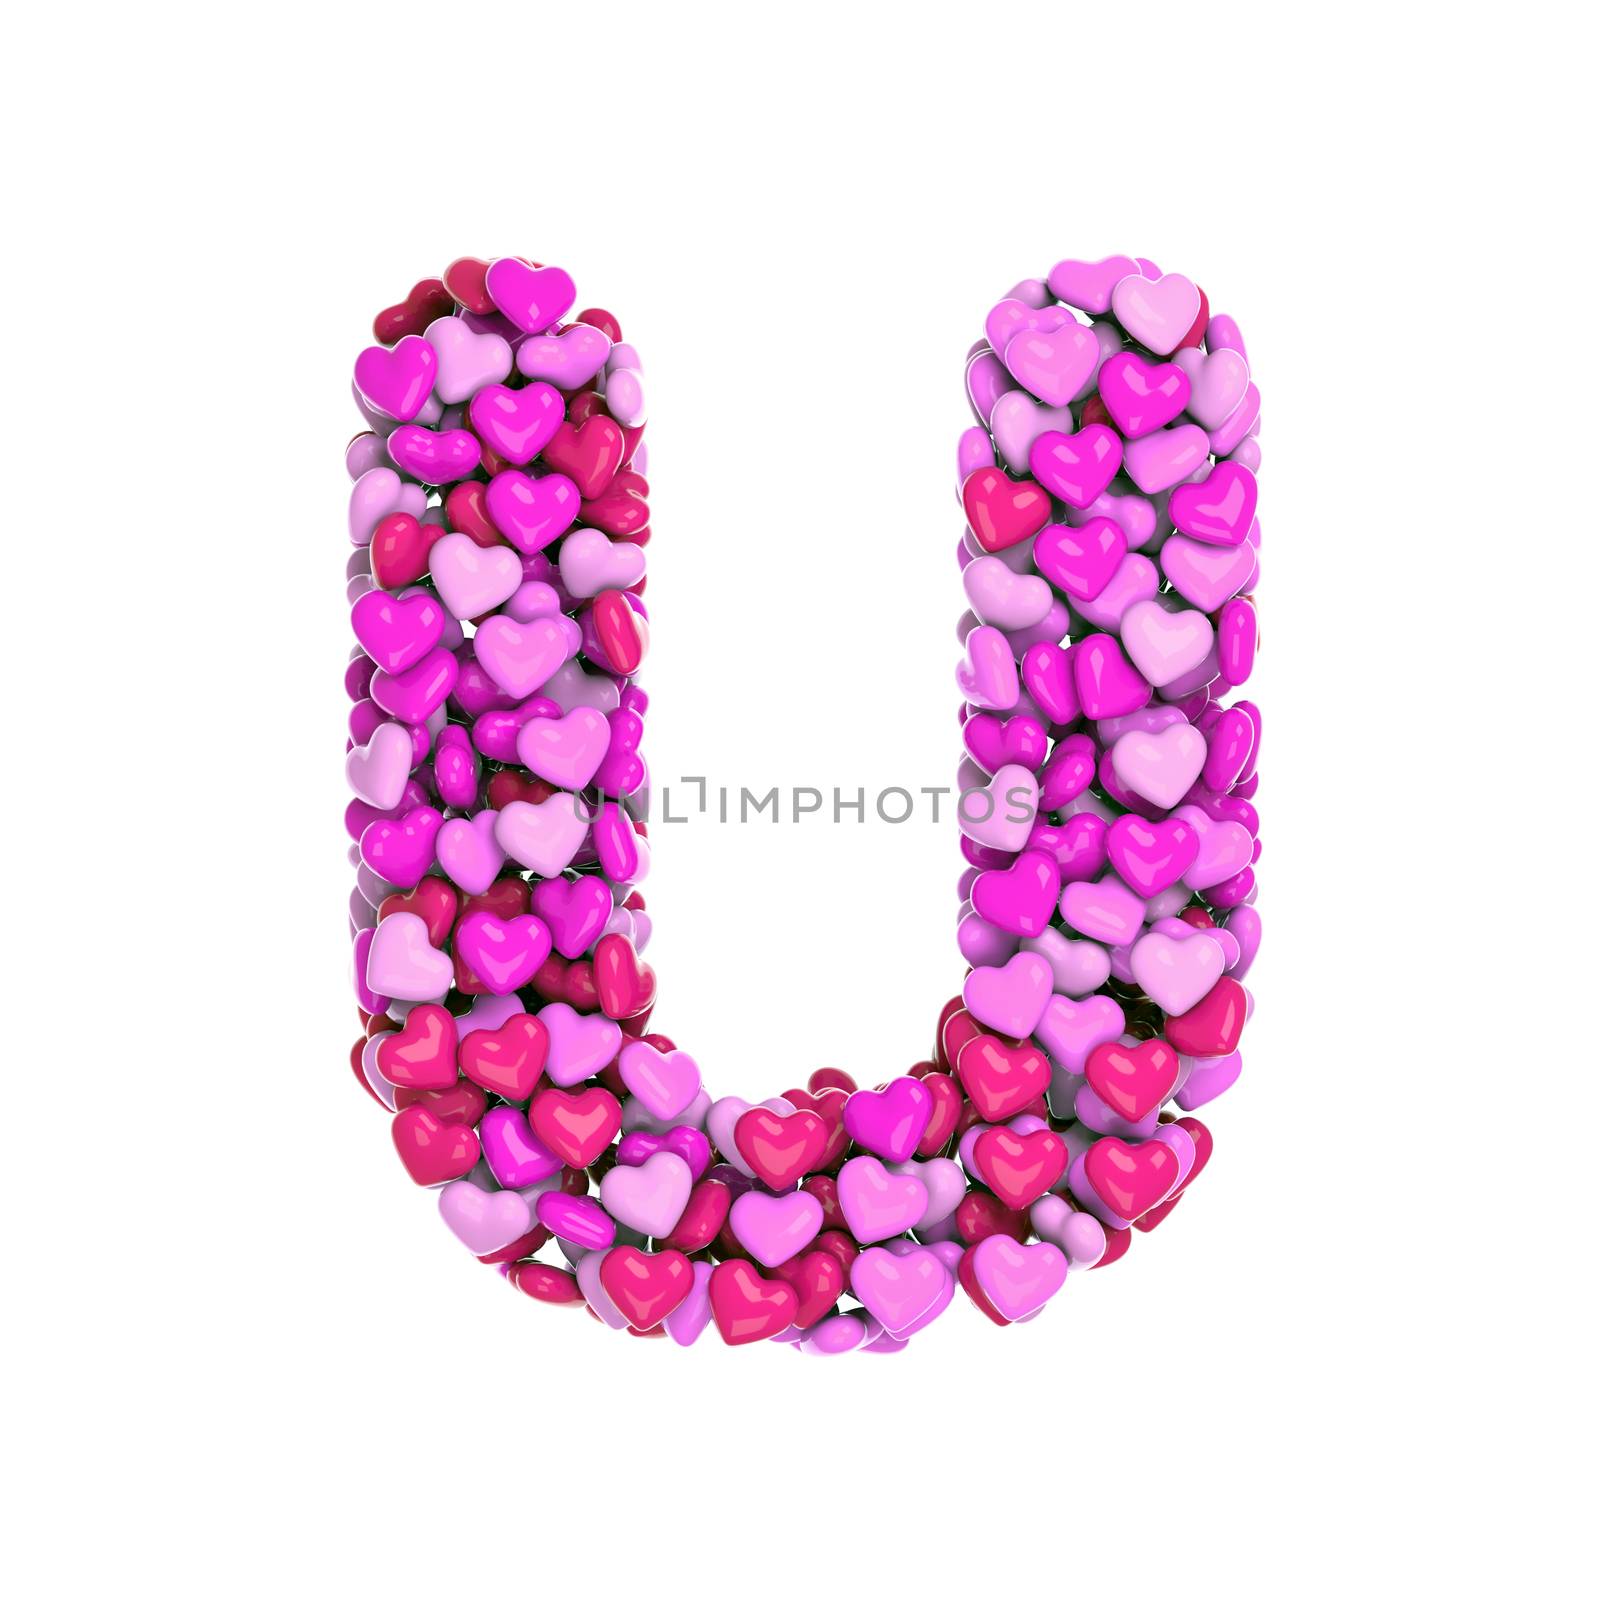 Valentine letter U - Capital 3d pink hearts font - Love, passion or wedding concept by chrisroll